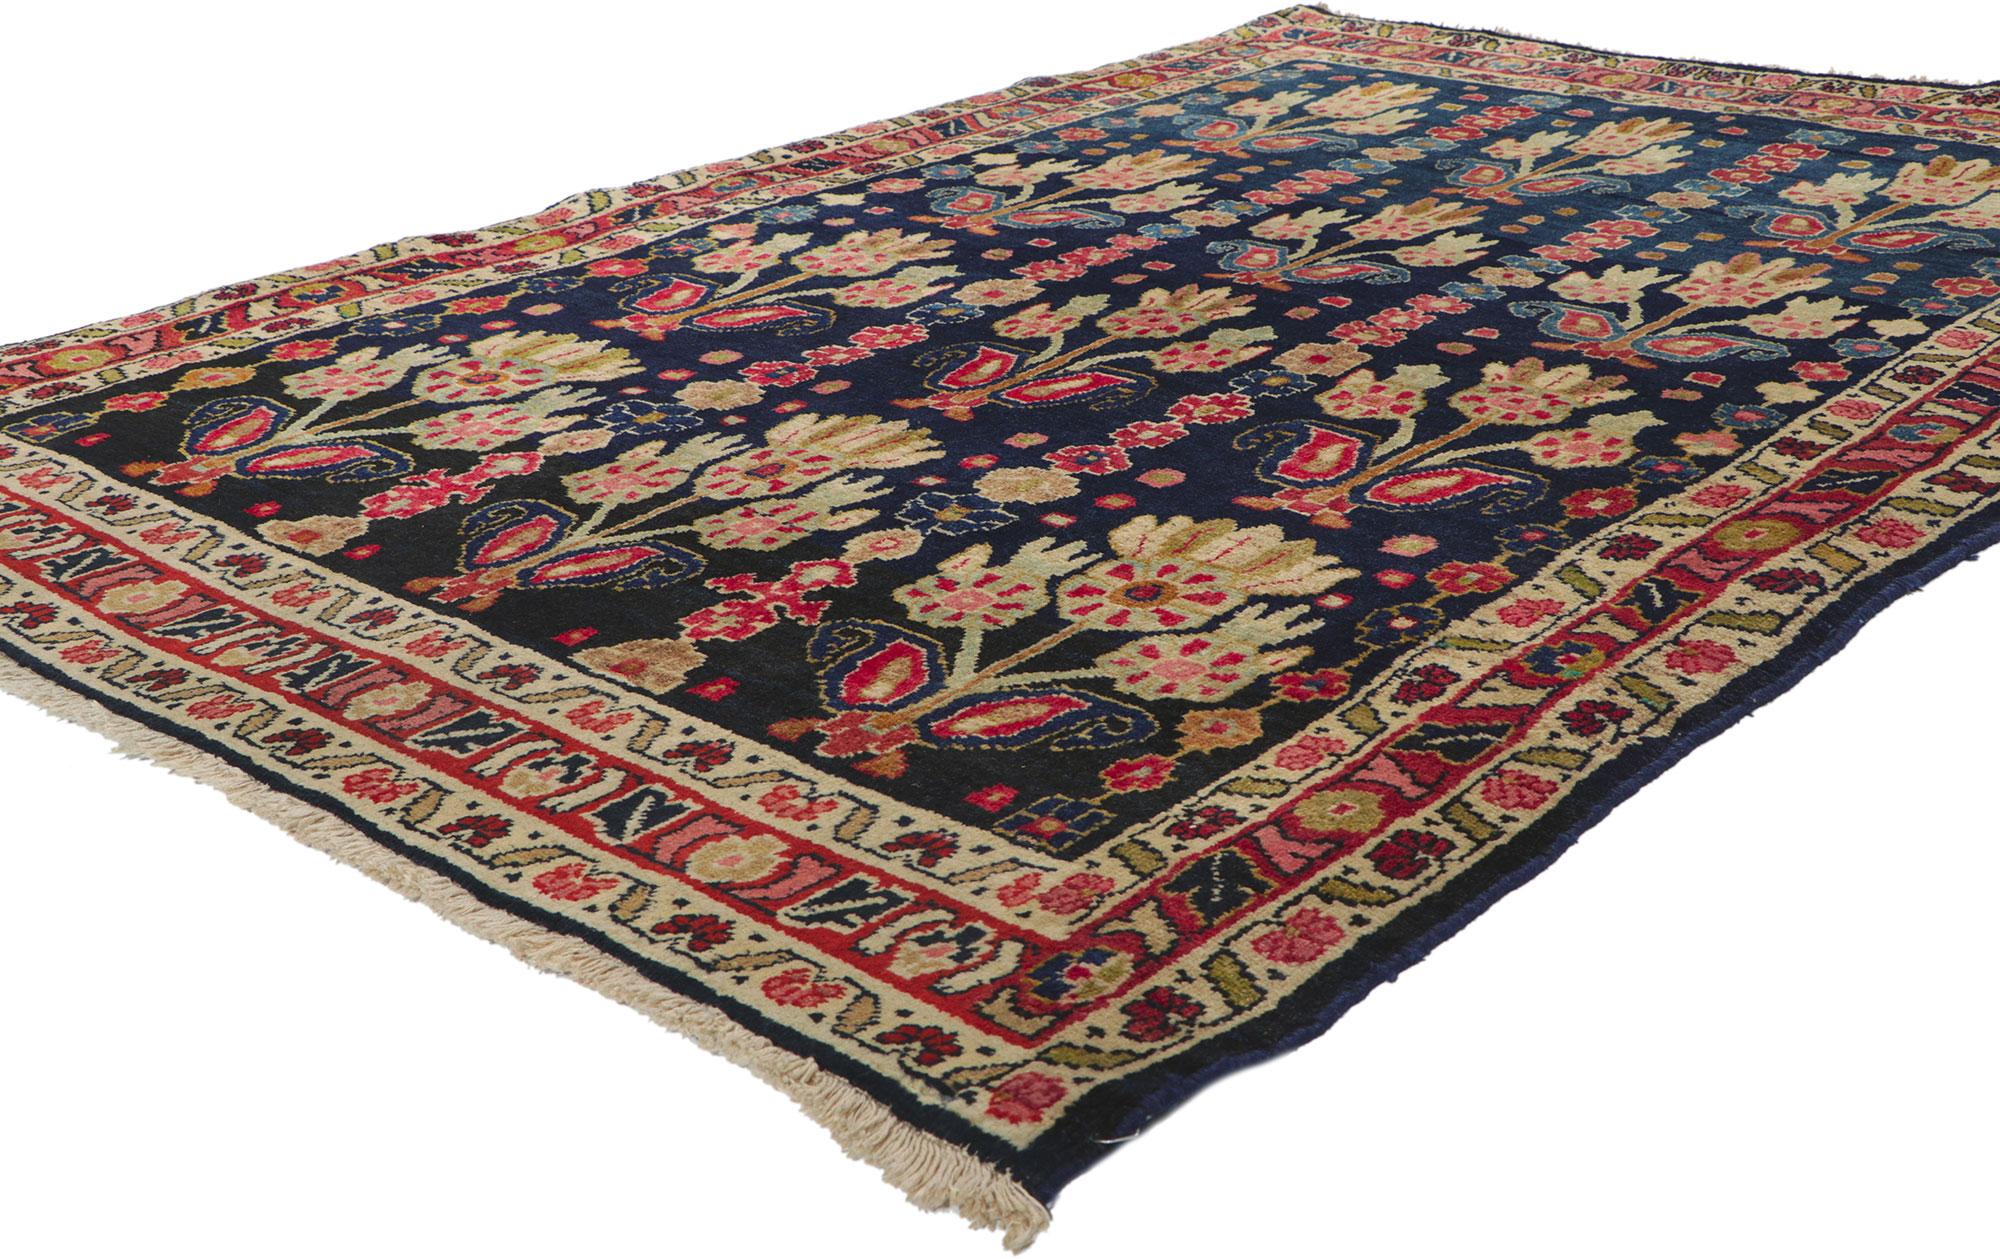 60948 Antique Persian Mahal Rug, 04'06 x 06'09.
Exuding timeless elegance and cultivated beauty, behold this exquisite hand-knotted wool antique Persian Mahal rug. Prepare to be enchanted by its traditional allover floral pattern, gracefully